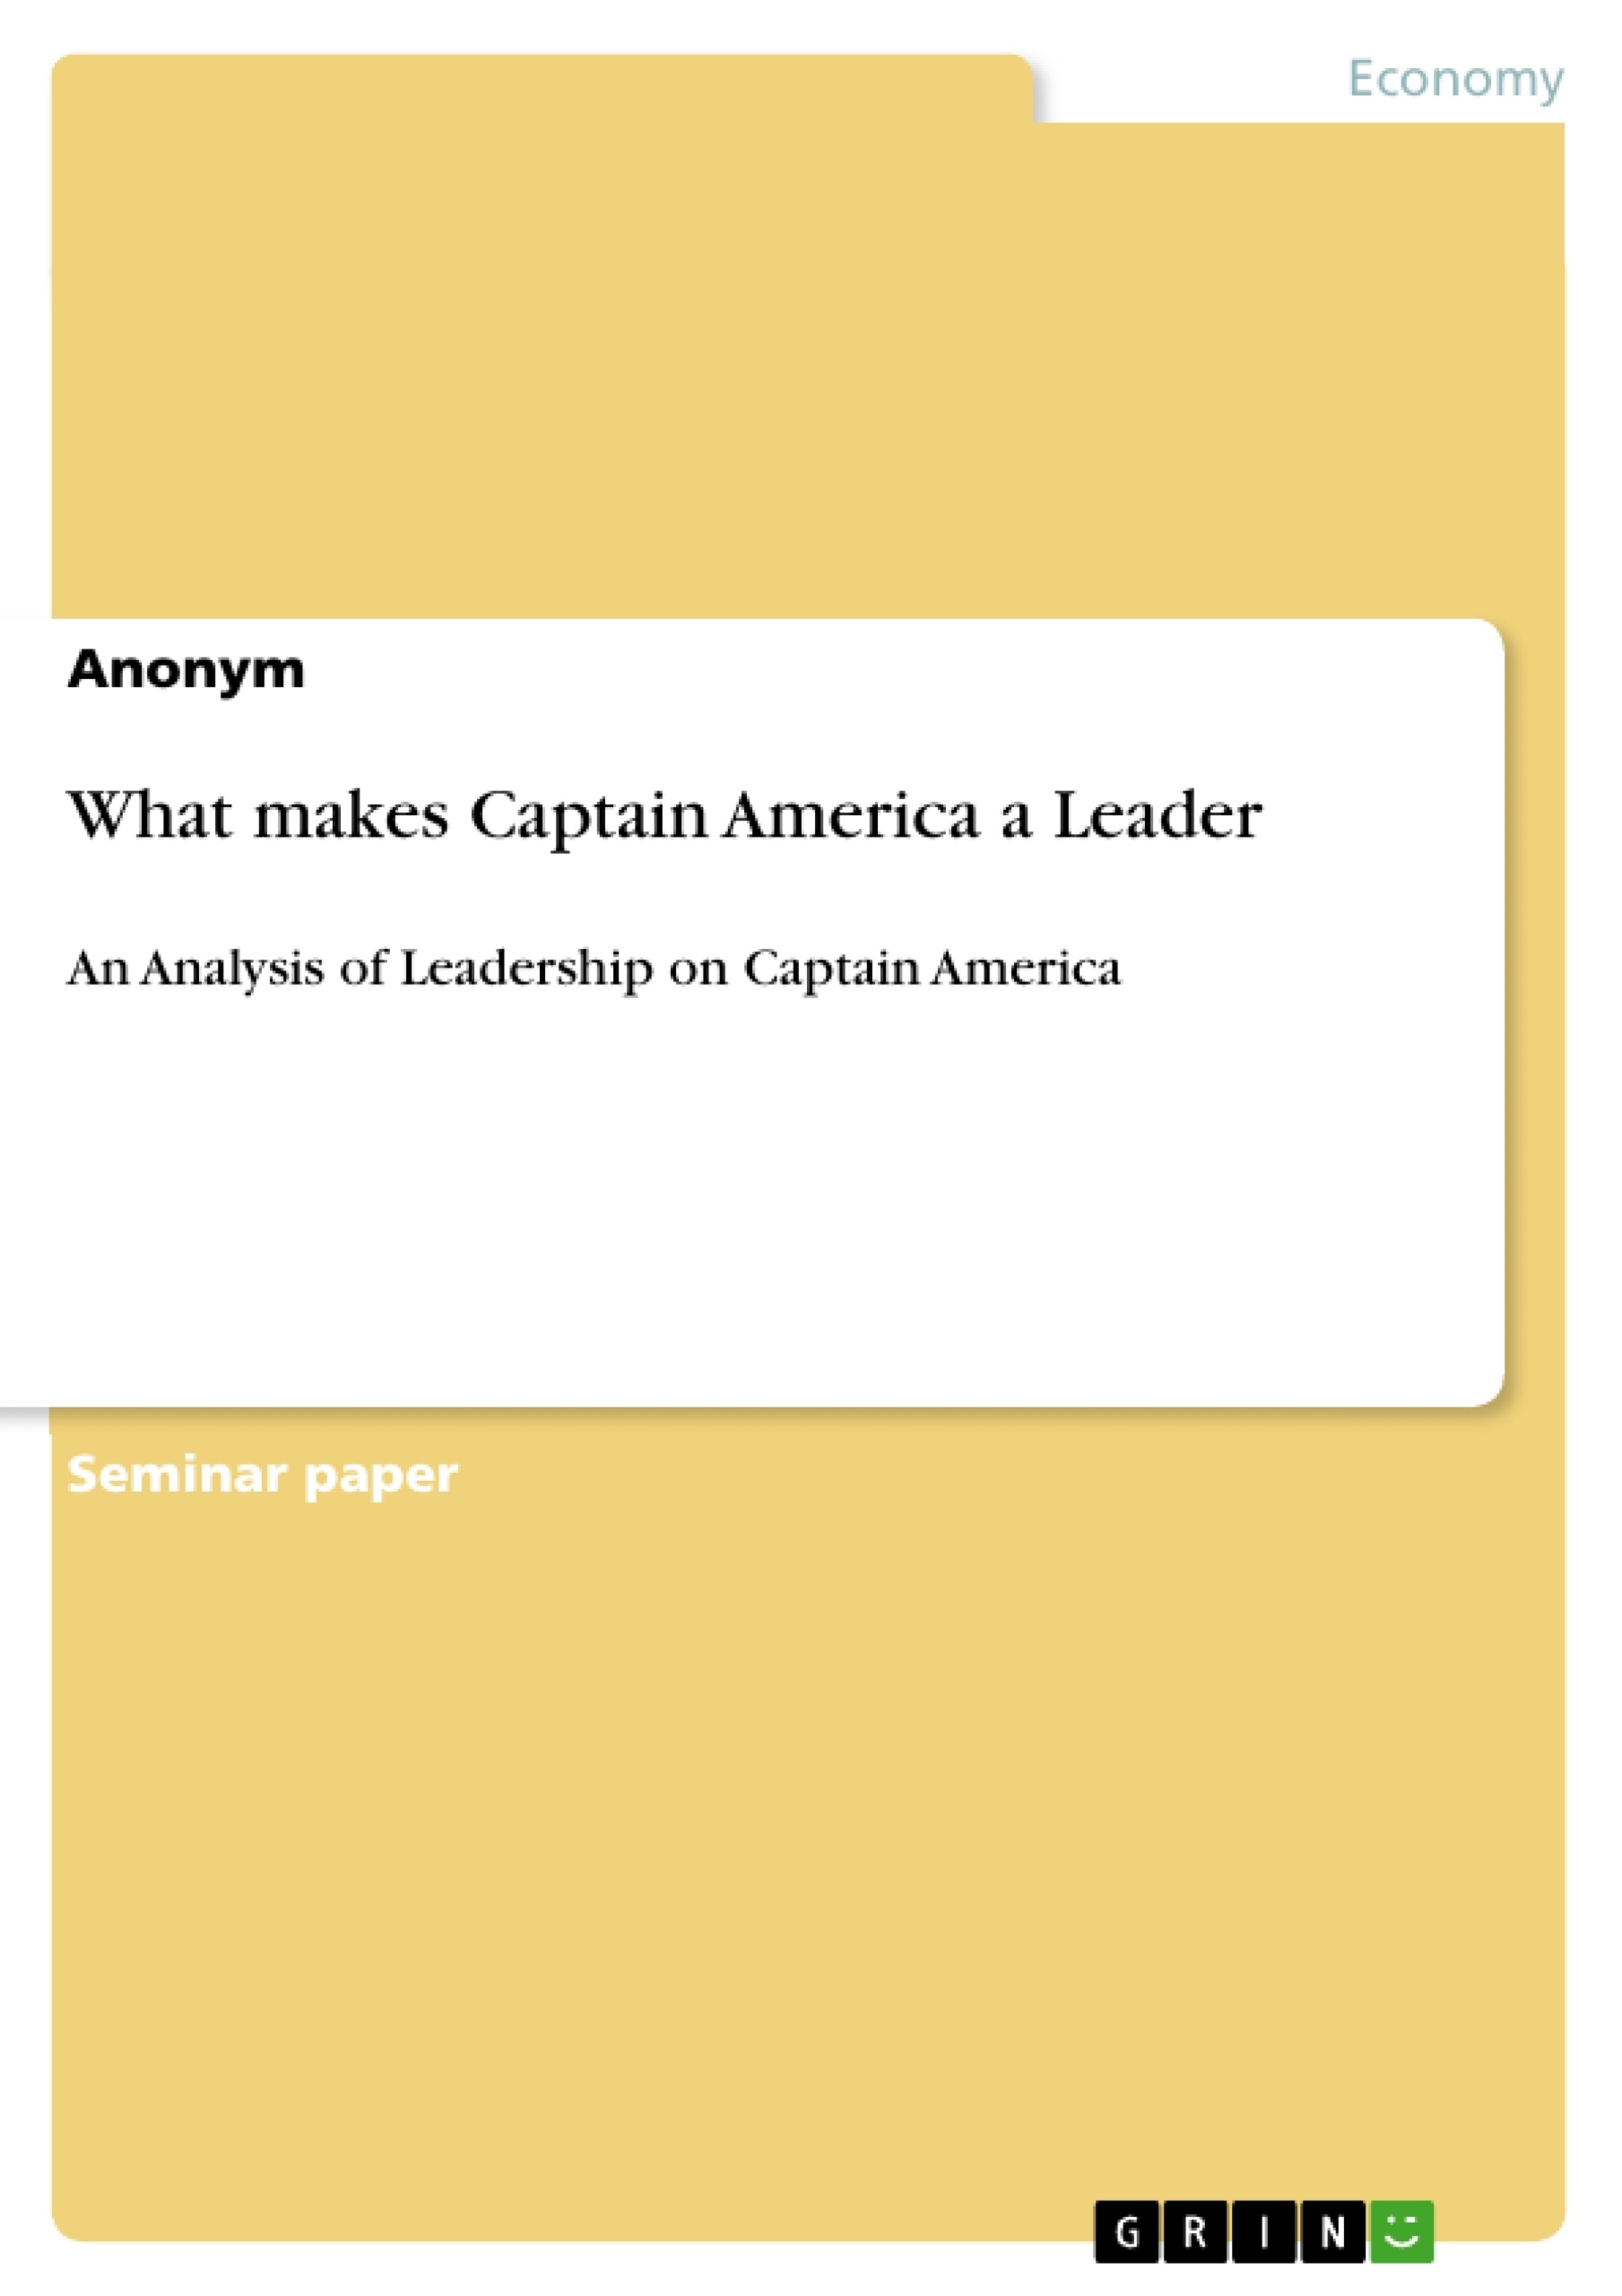 Title: What makes Captain America a Leader